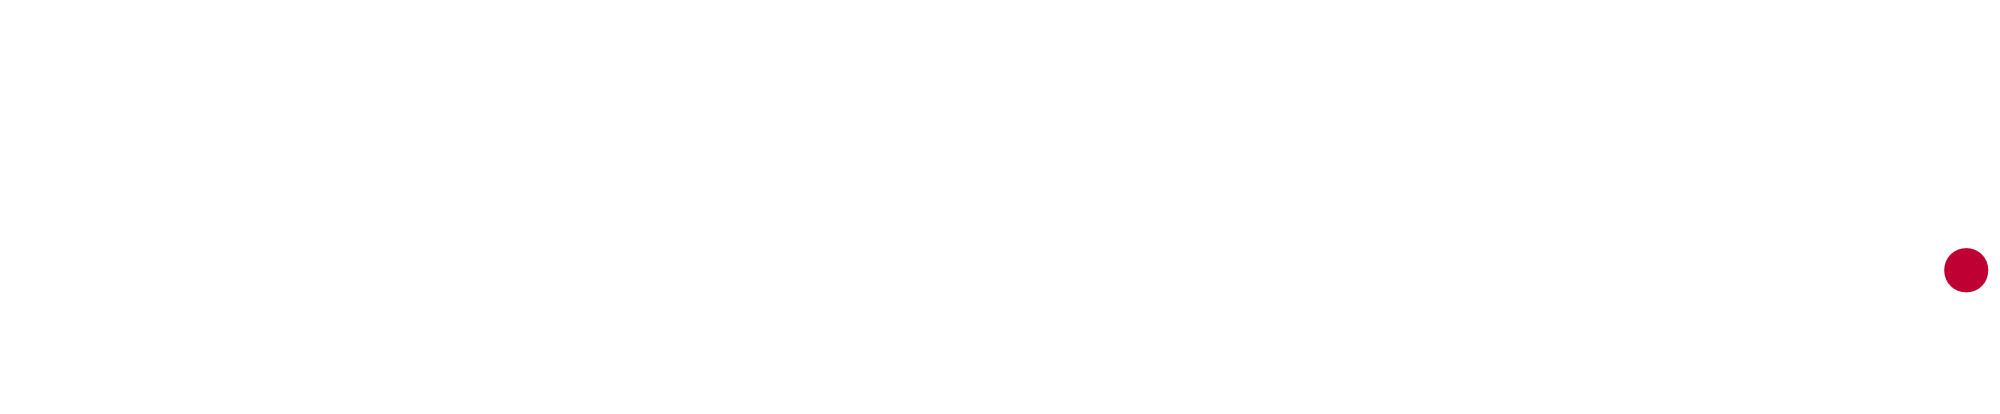 Spend Network logo - high res - white